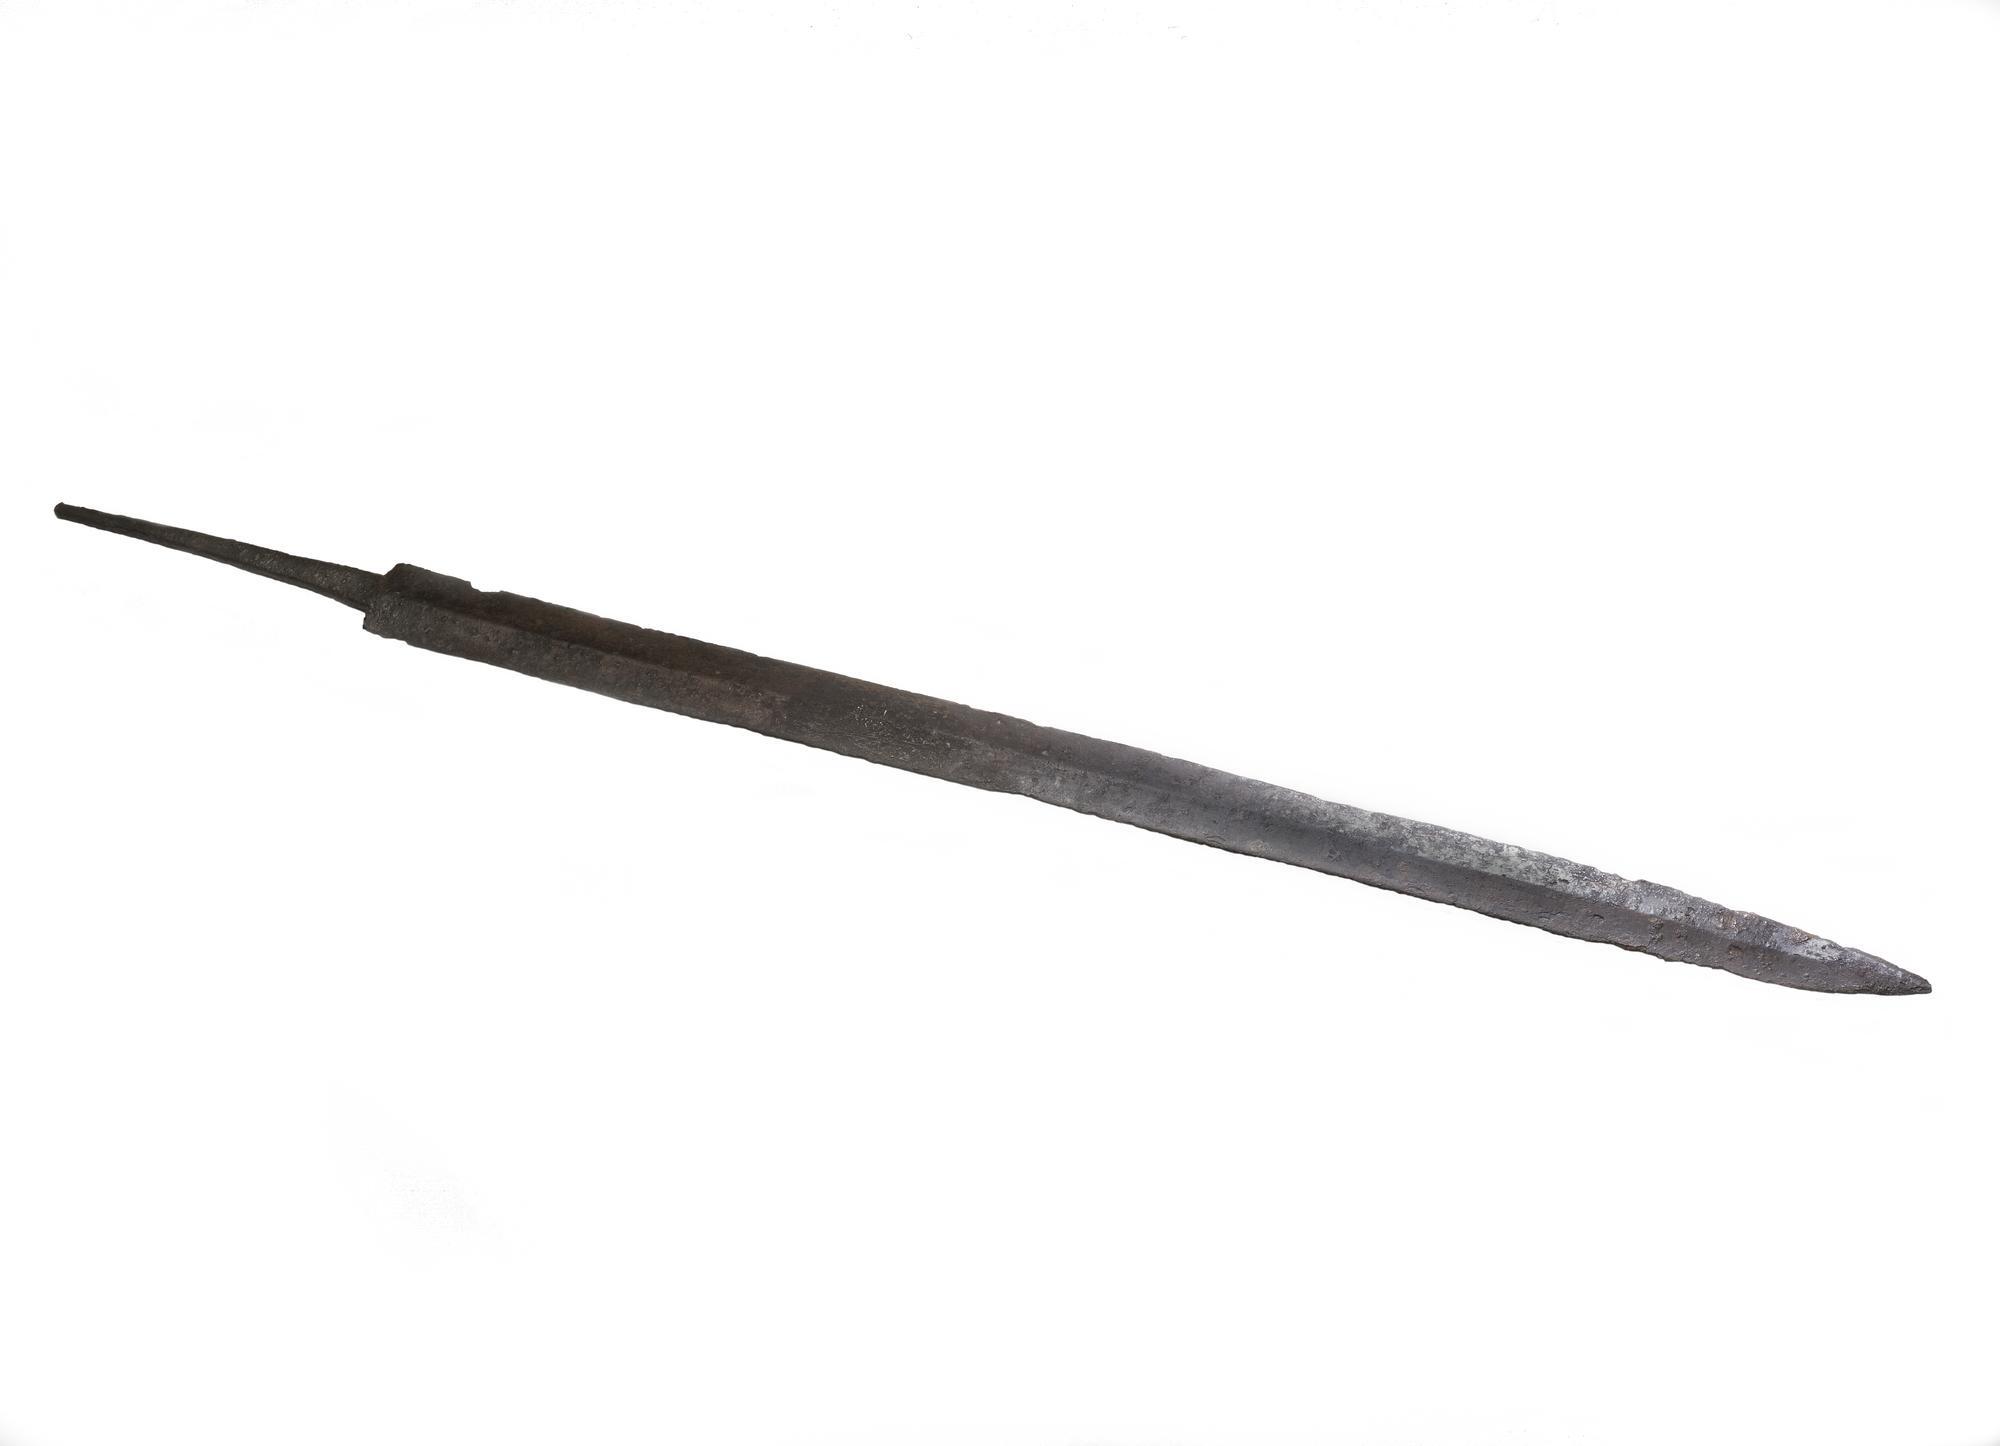 Image of Roman auxiliary sword or spatha, from the Roman site at Newstead, 80 - 100 AD © National Museums Scotland